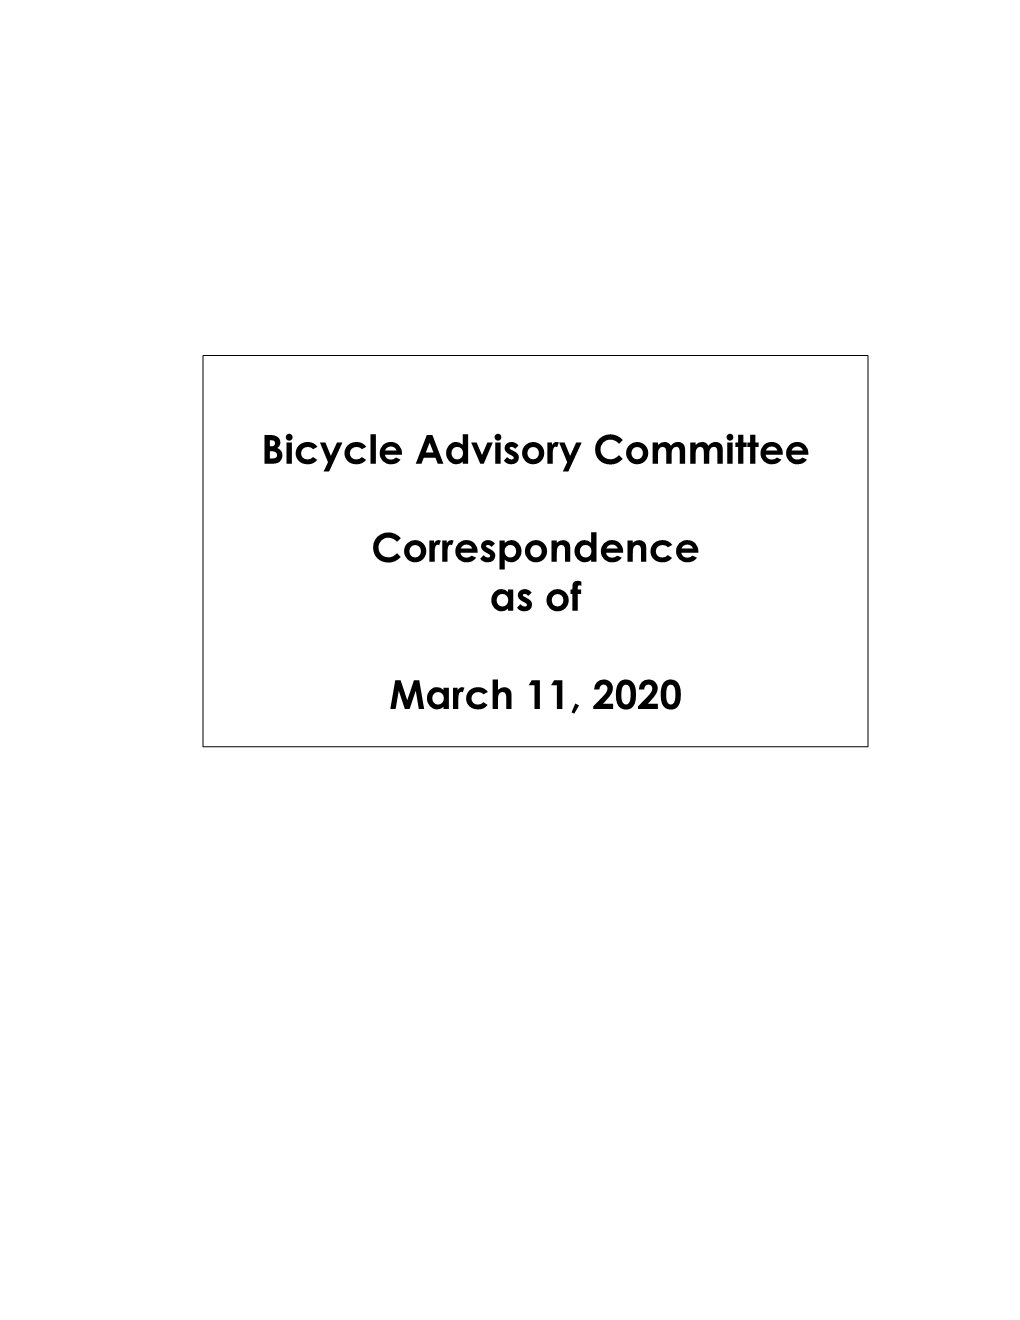 Bicycle Advisory Committee Correspondence As of March 11